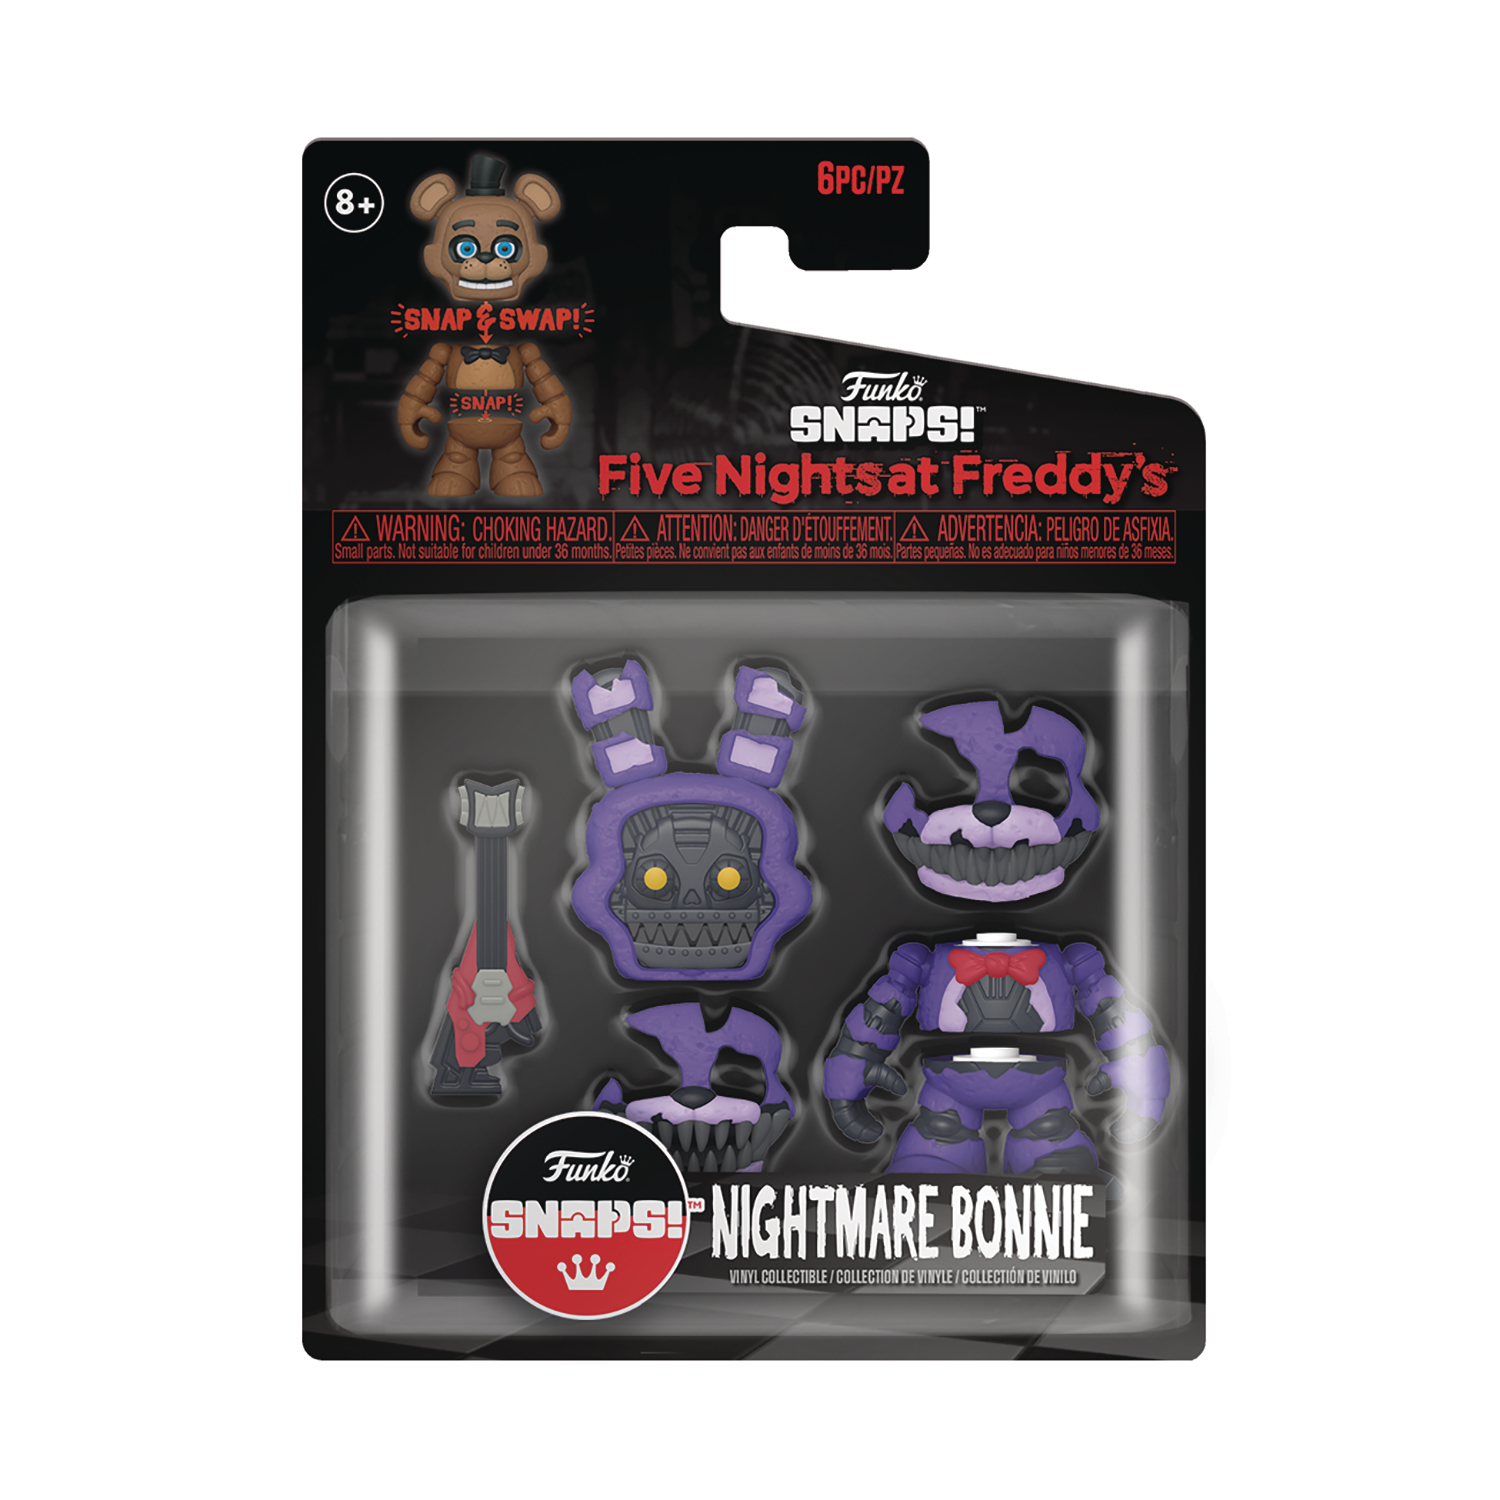 Five Nights At Freddys Snap Nightmare Bonnie Figure